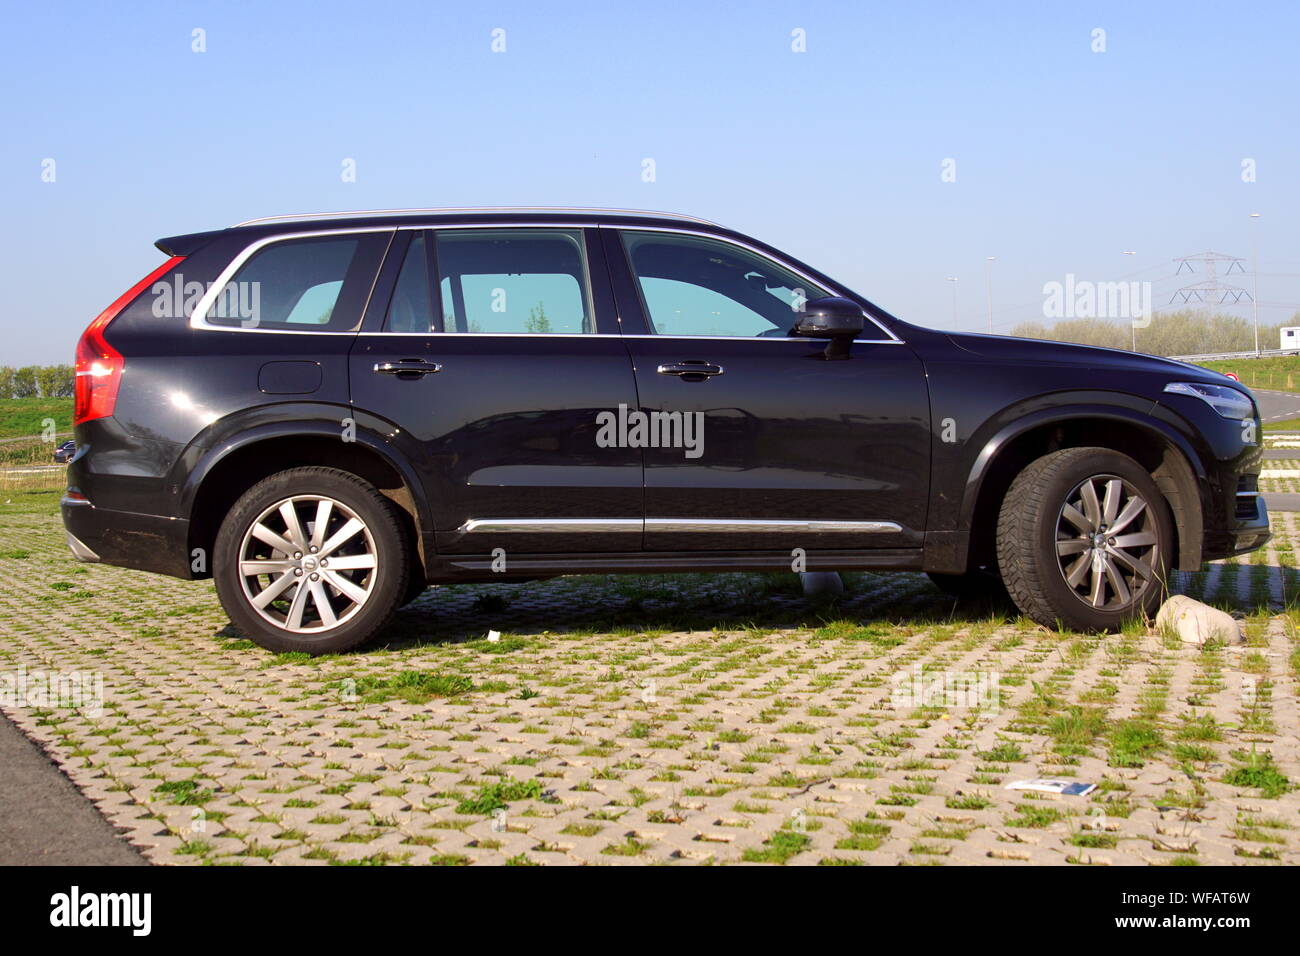 Almere, Flevoland, The Netherlands - March 17, 2018: Black Volvo XC90 SUV parked on parked on a public parking lot. Nobody in de vehicle. Stock Photo